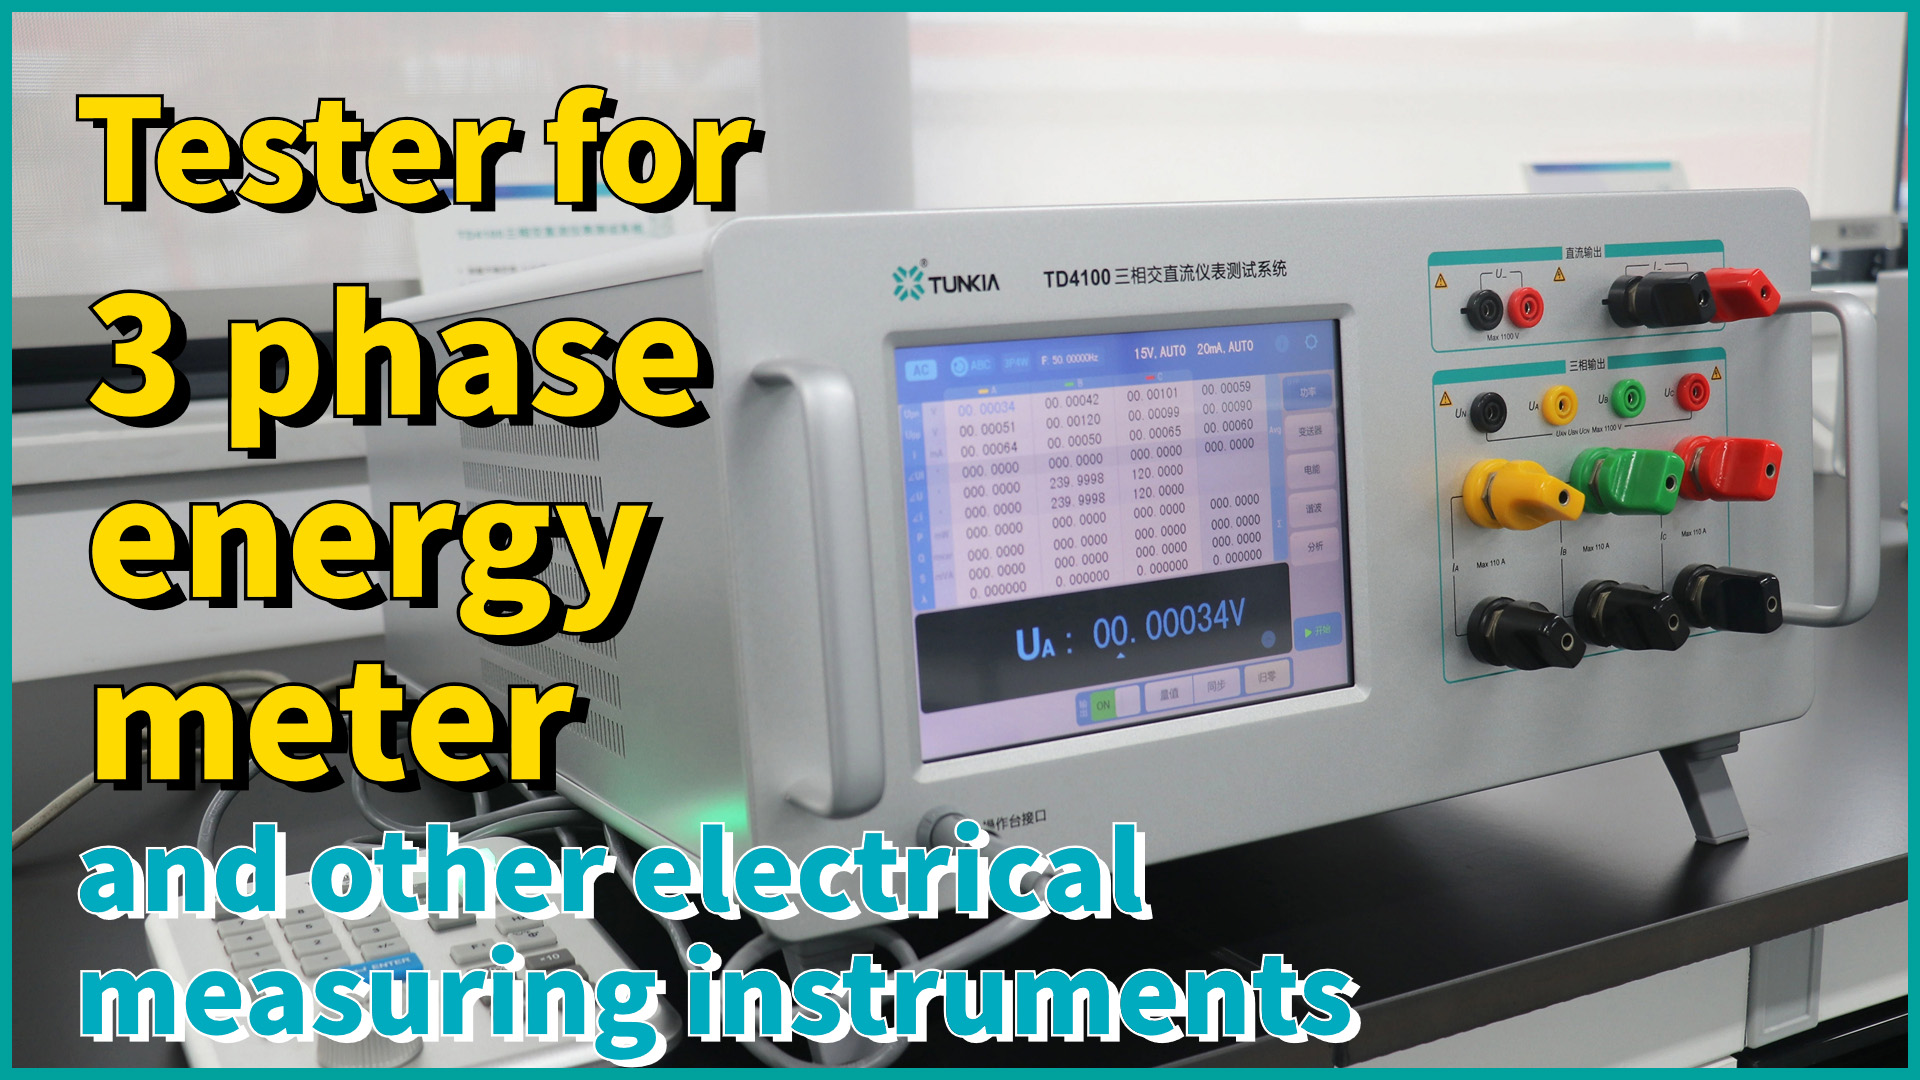 TD4100 Tester for 3 phase Energy Meter and Other Electrical Measuring Instruments